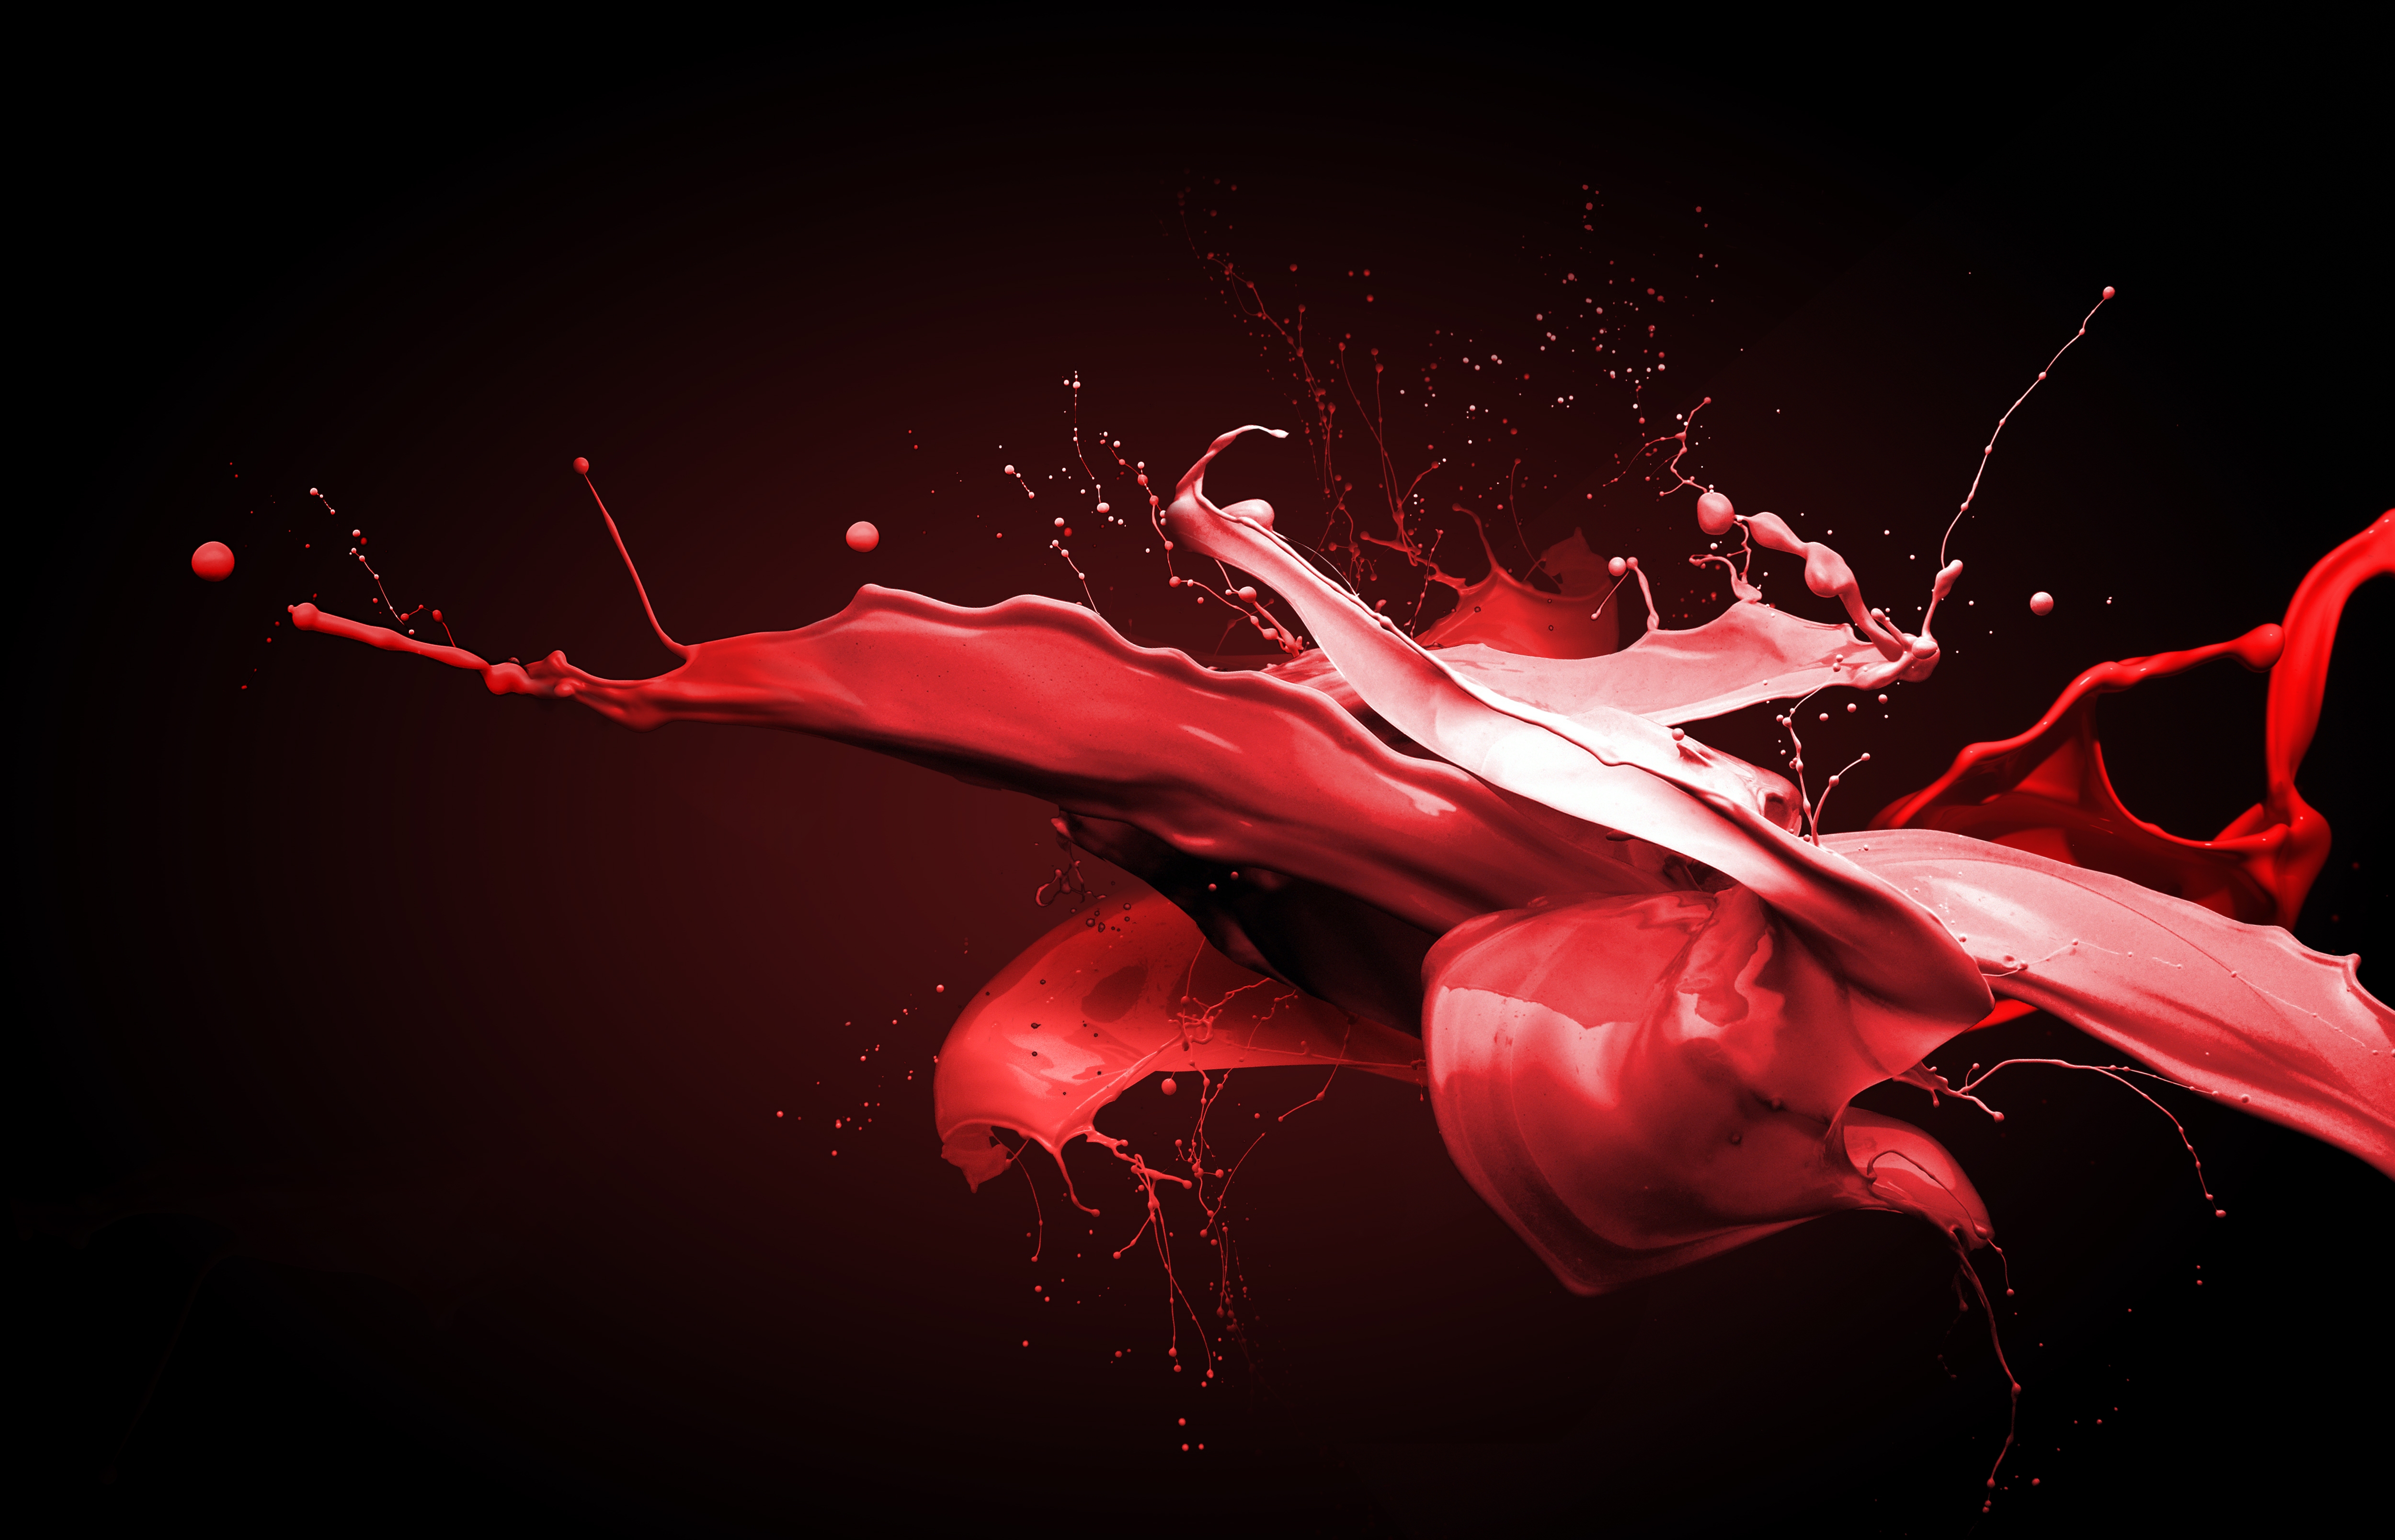 HD wallpaper, Acer Nitro, Official, Gaming Laptop, Red Abstract, 5K